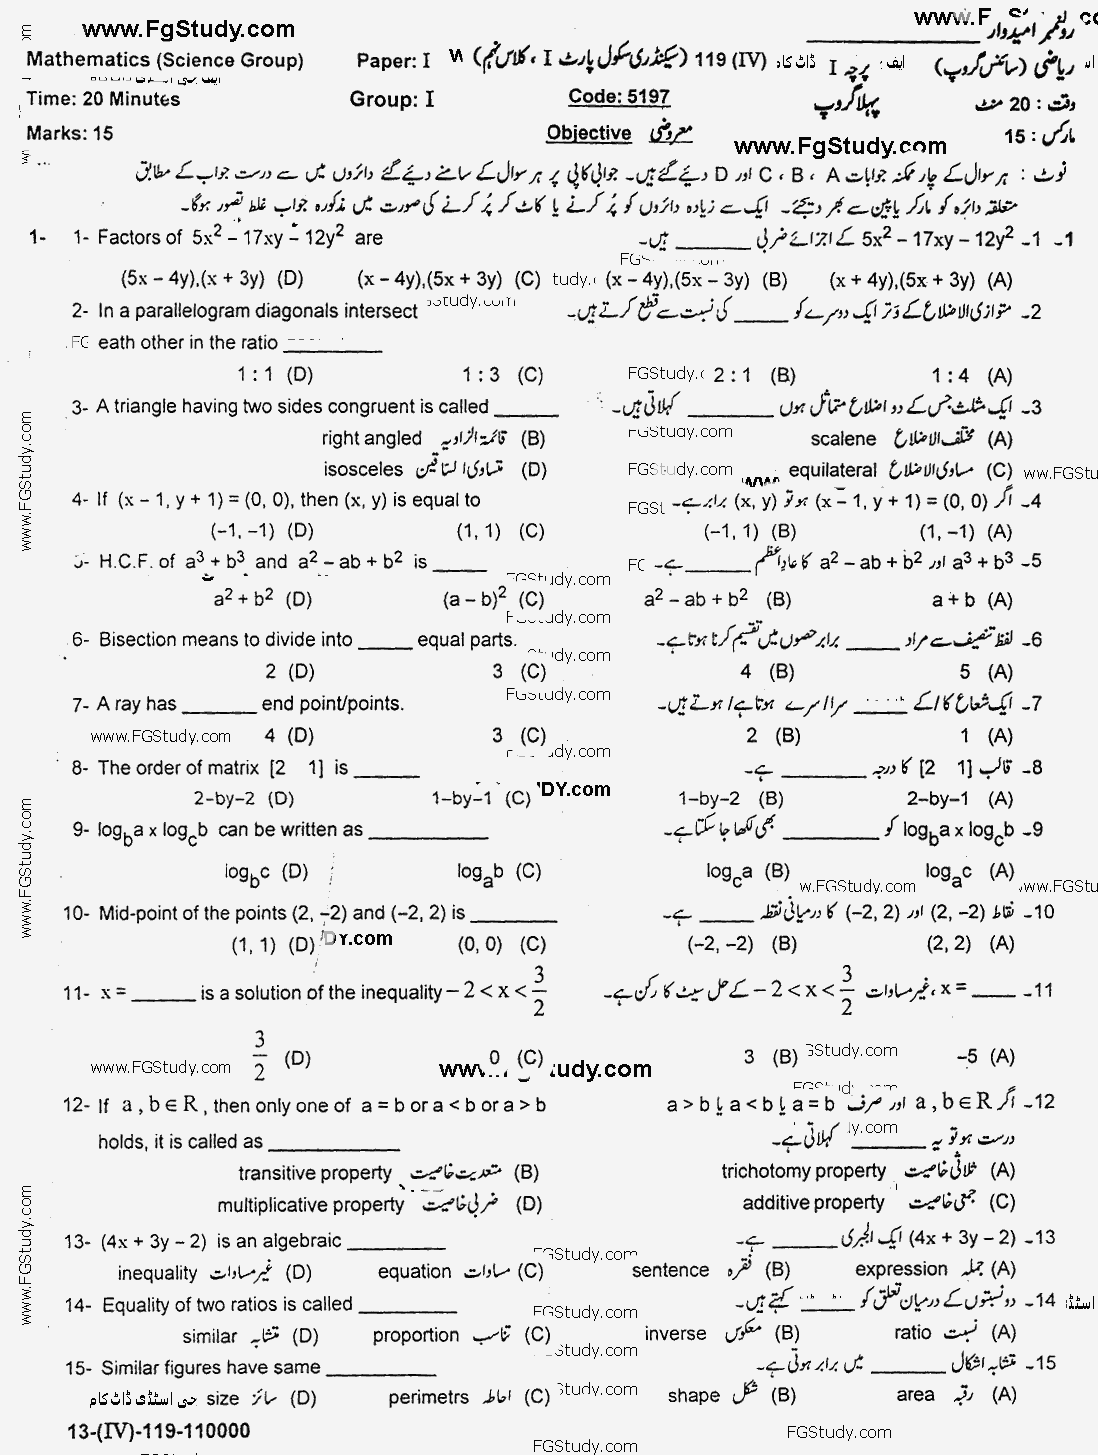 Gujranwala Board Mathematics Objective Group 1 9th Class Past Papers 2019